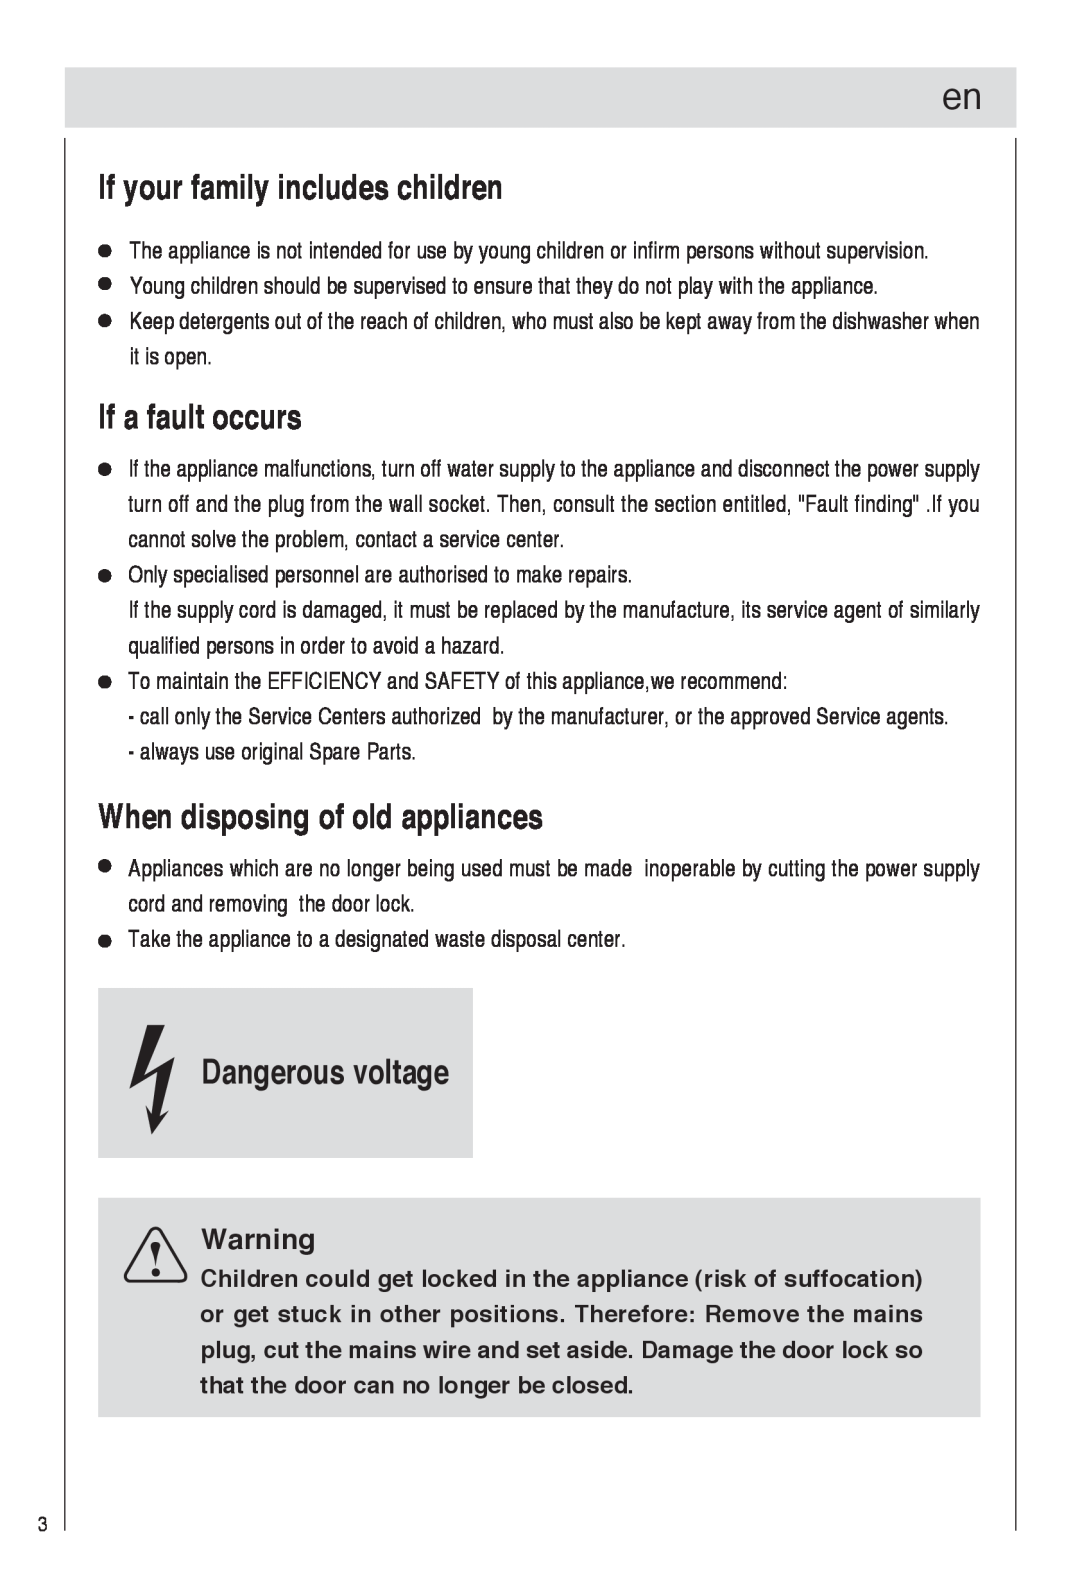 Haier DW9-TFE1 If your family includes children, If a fault occurs, When disposing of old appliances, Dangerous voltage 